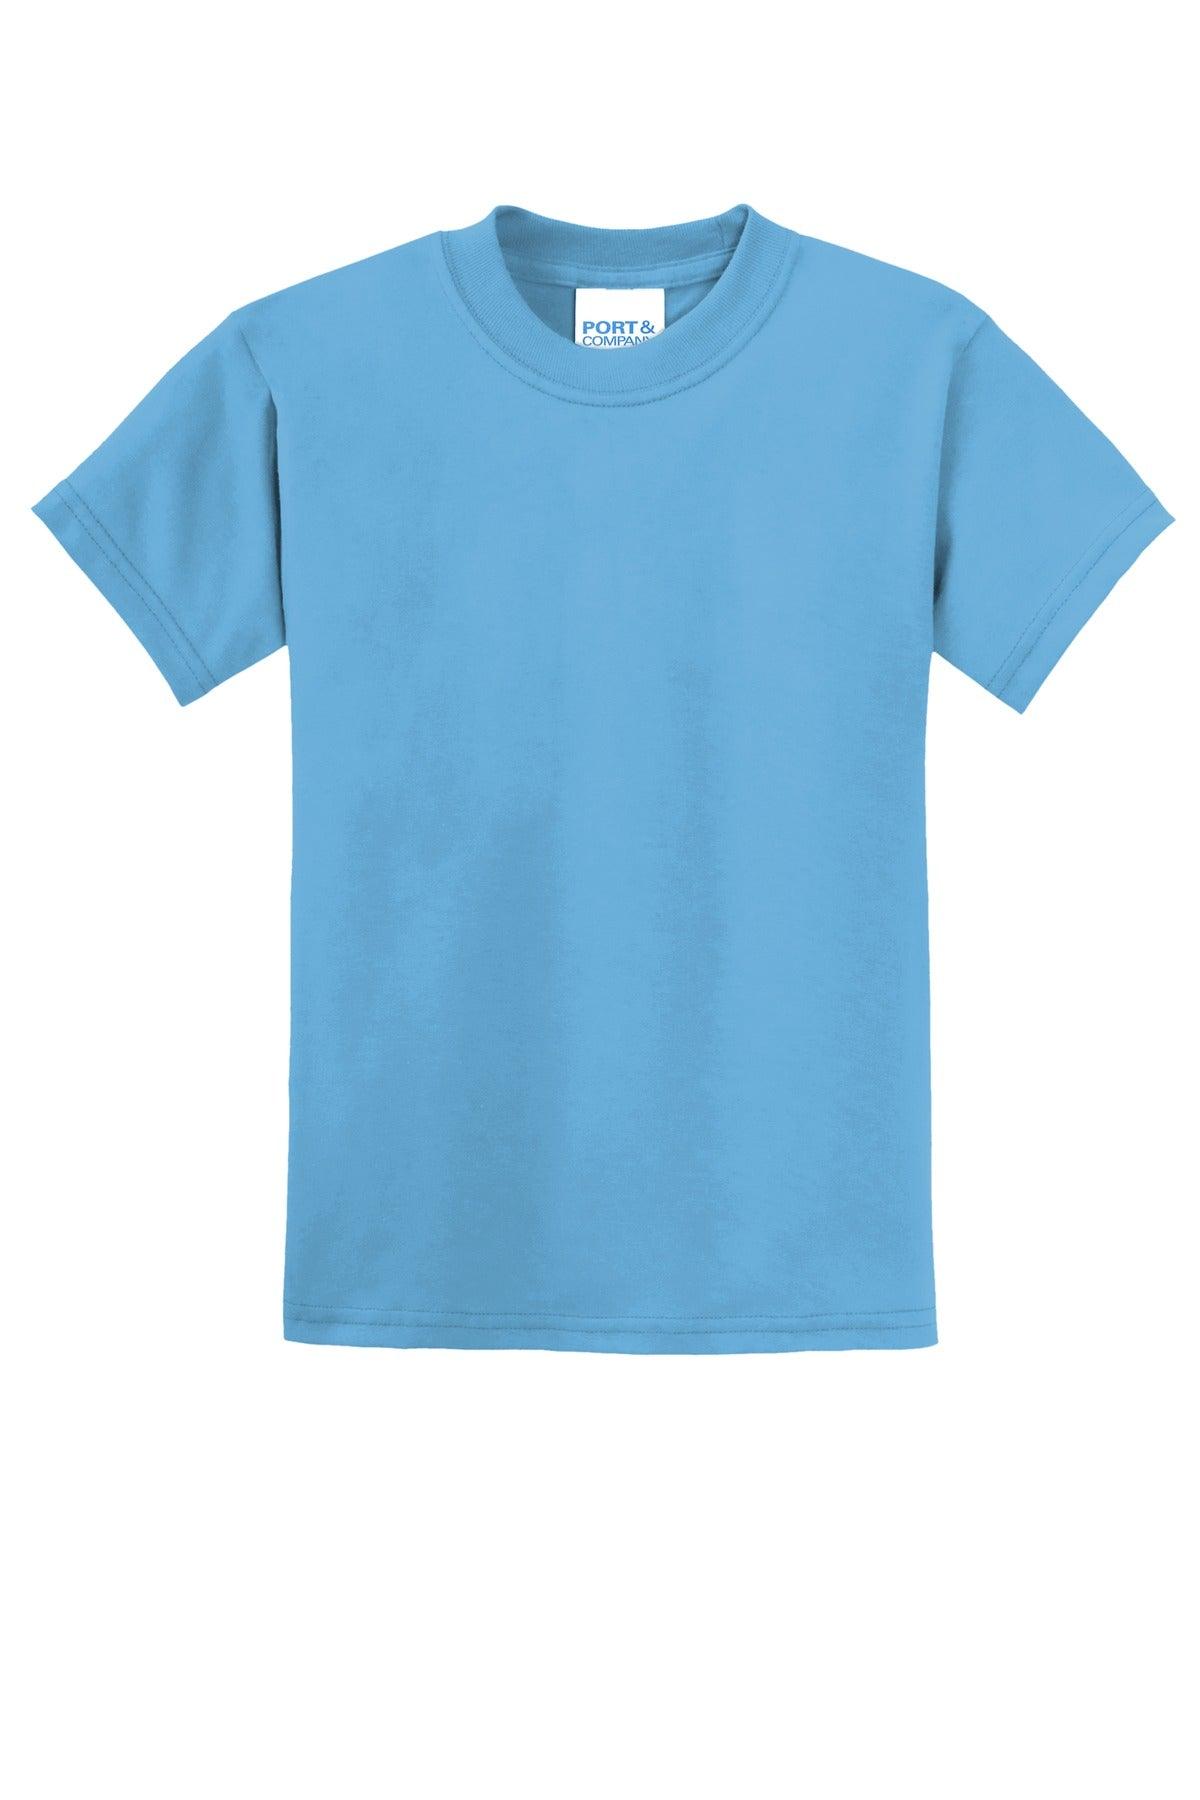 Port & Company - Youth Core Blend Tee. PC55Y - Dresses Max